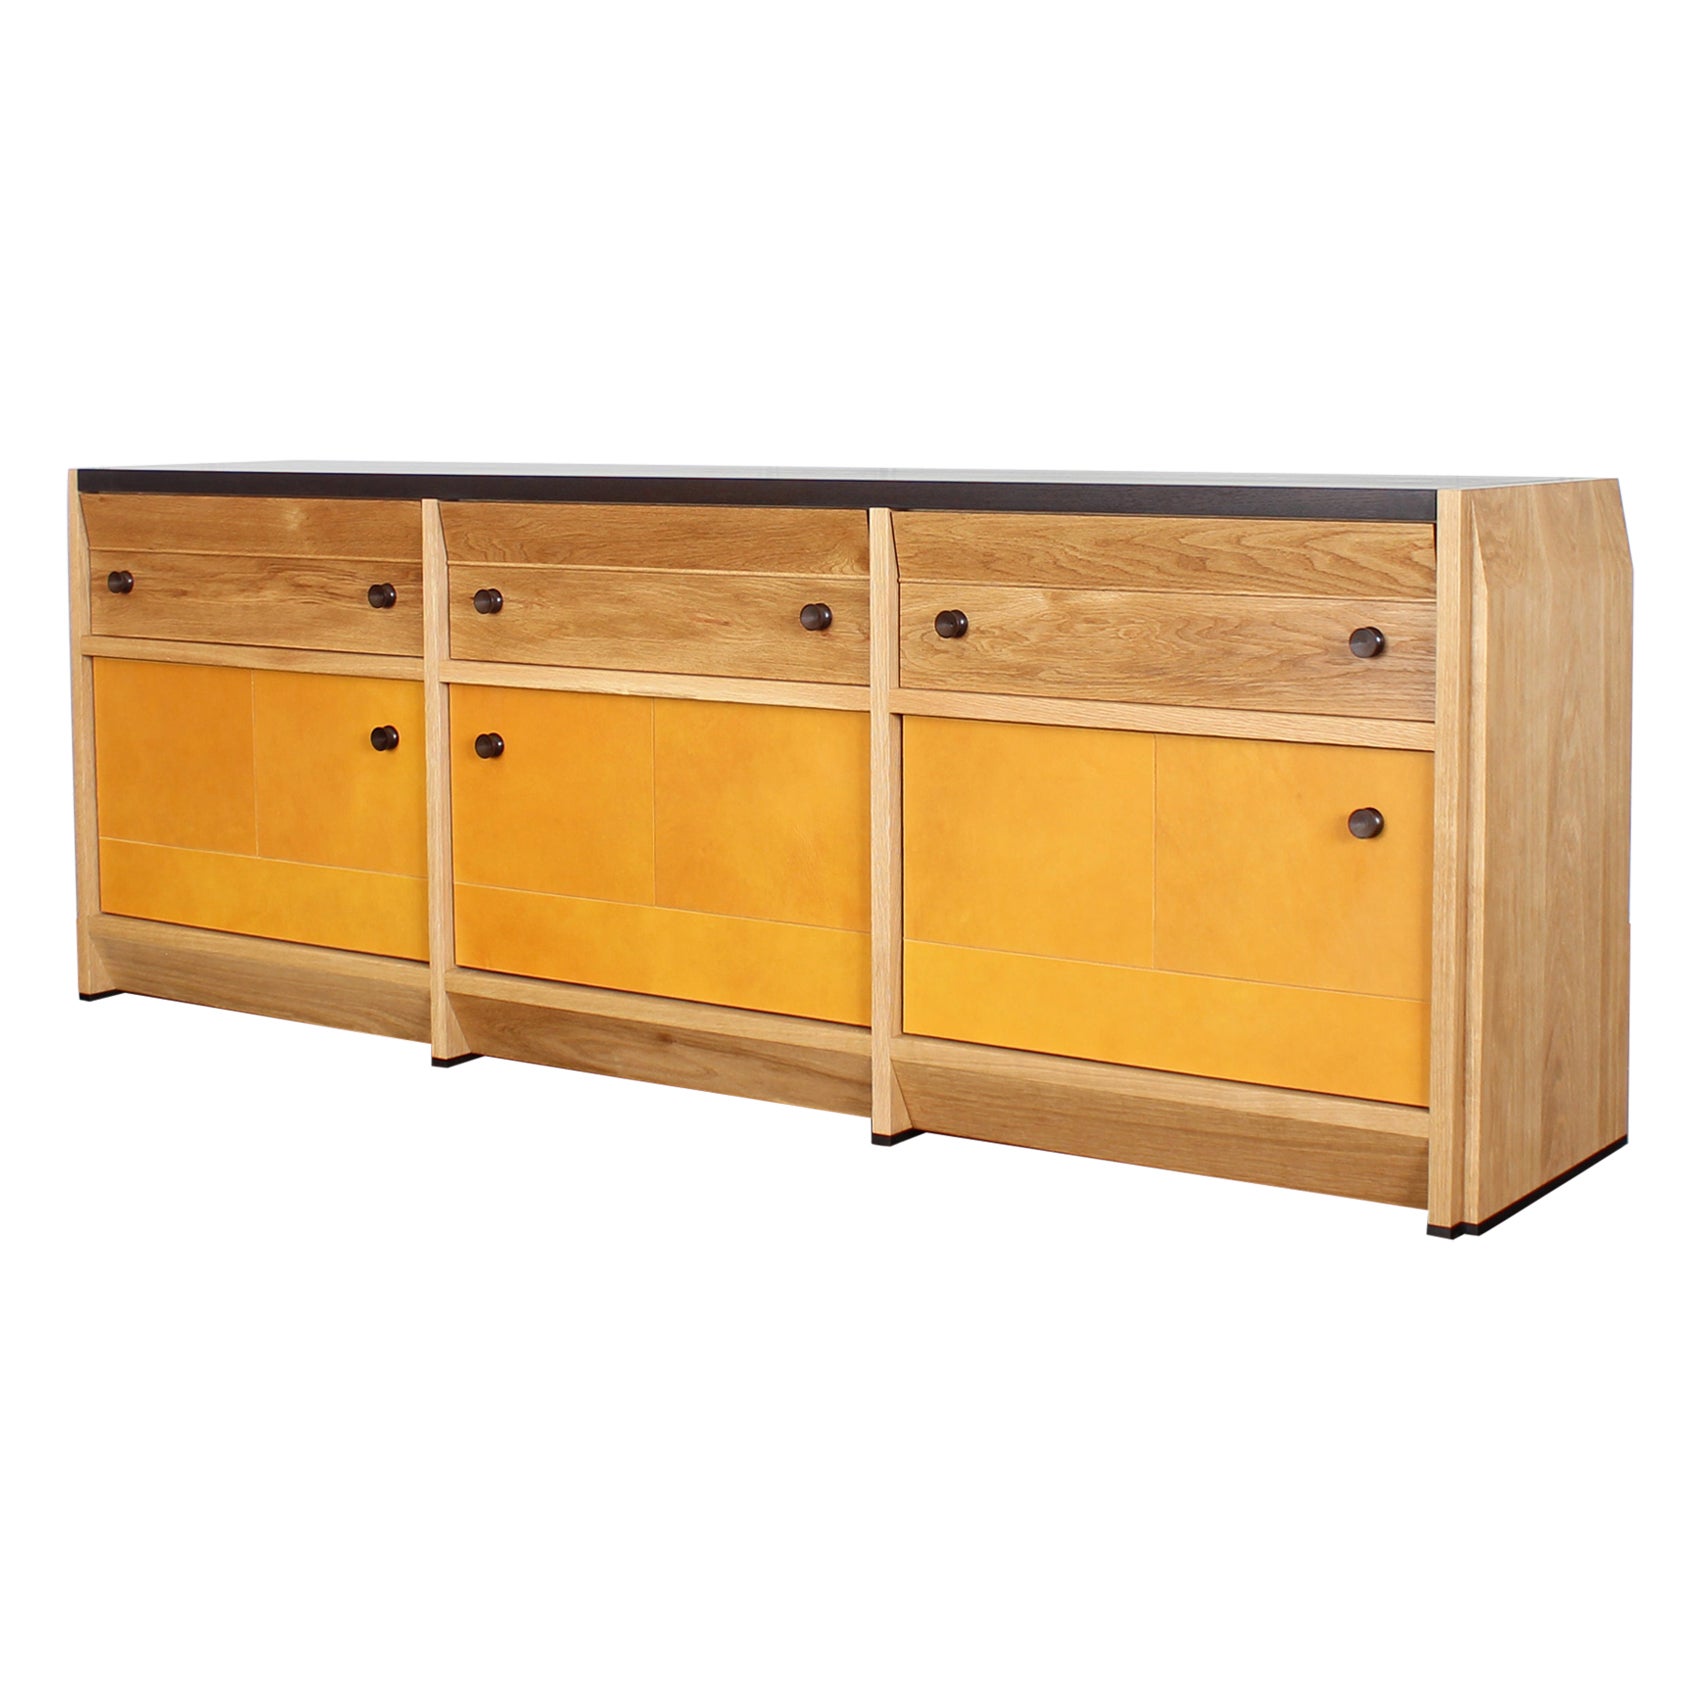 Octavia solid wood and leather credenza and sideboard by Crump and Kwash 